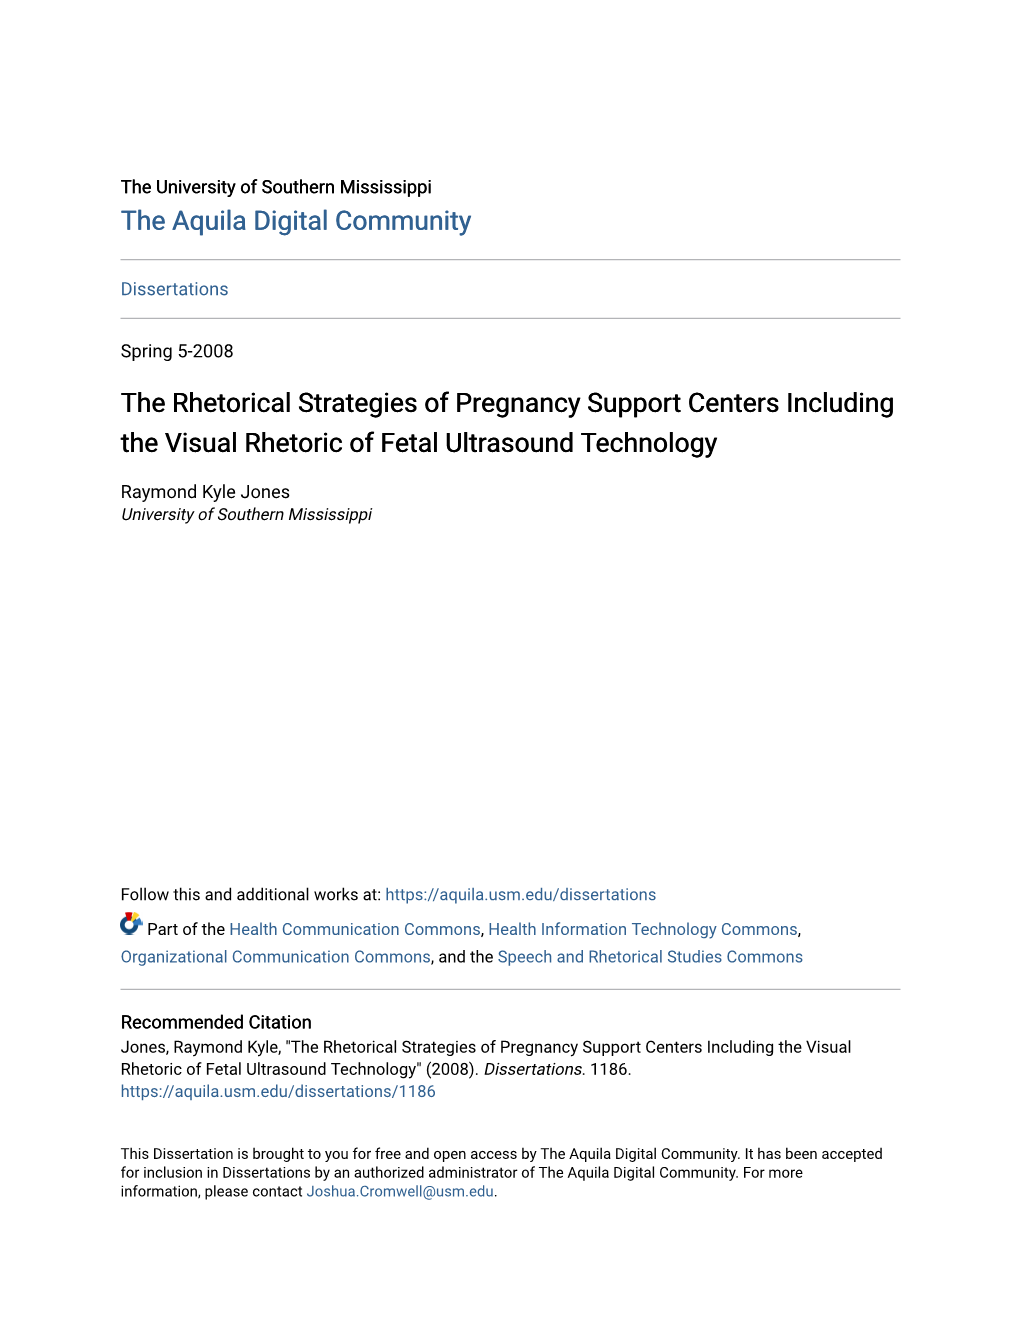 The Rhetorical Strategies of Pregnancy Support Centers Including the Visual Rhetoric of Fetal Ultrasound Technology